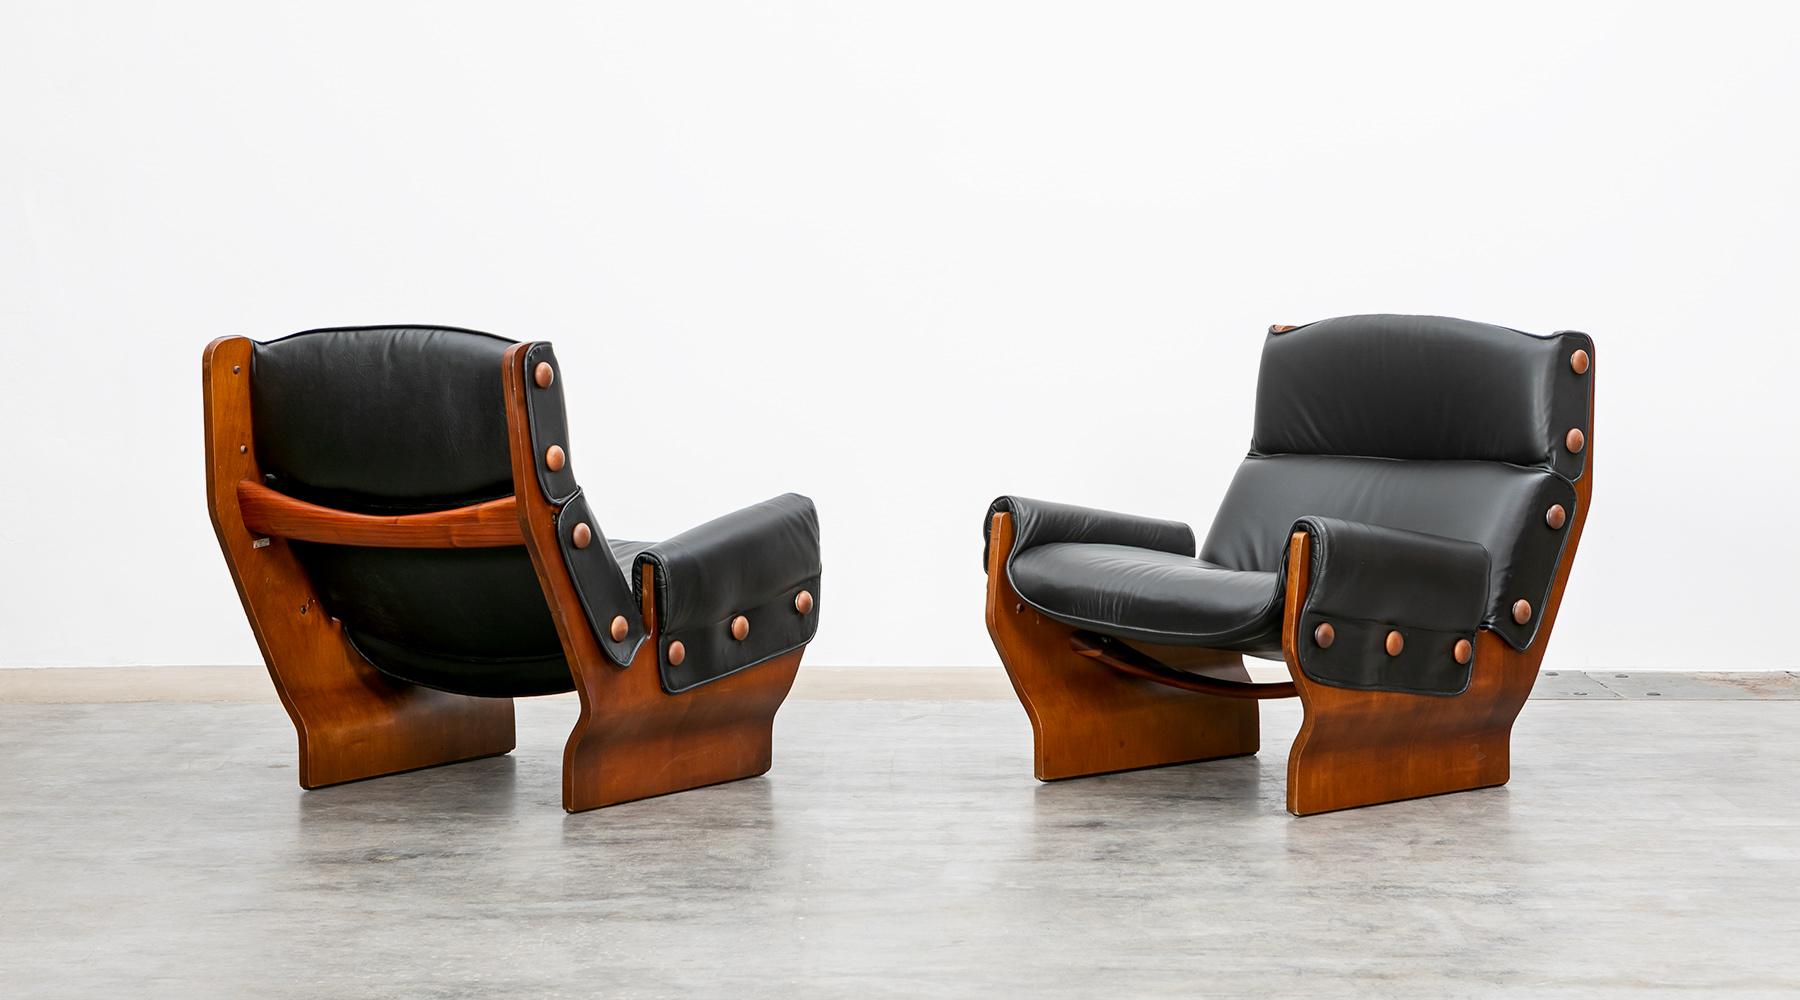 Two majestic, rustic lounge chairs designed by famous Osvaldo Borsani. The seat is made of upholstered leather and comes in good condition and sits on a wooden base. On the sides are decorative button borders, which are also made of wood. A